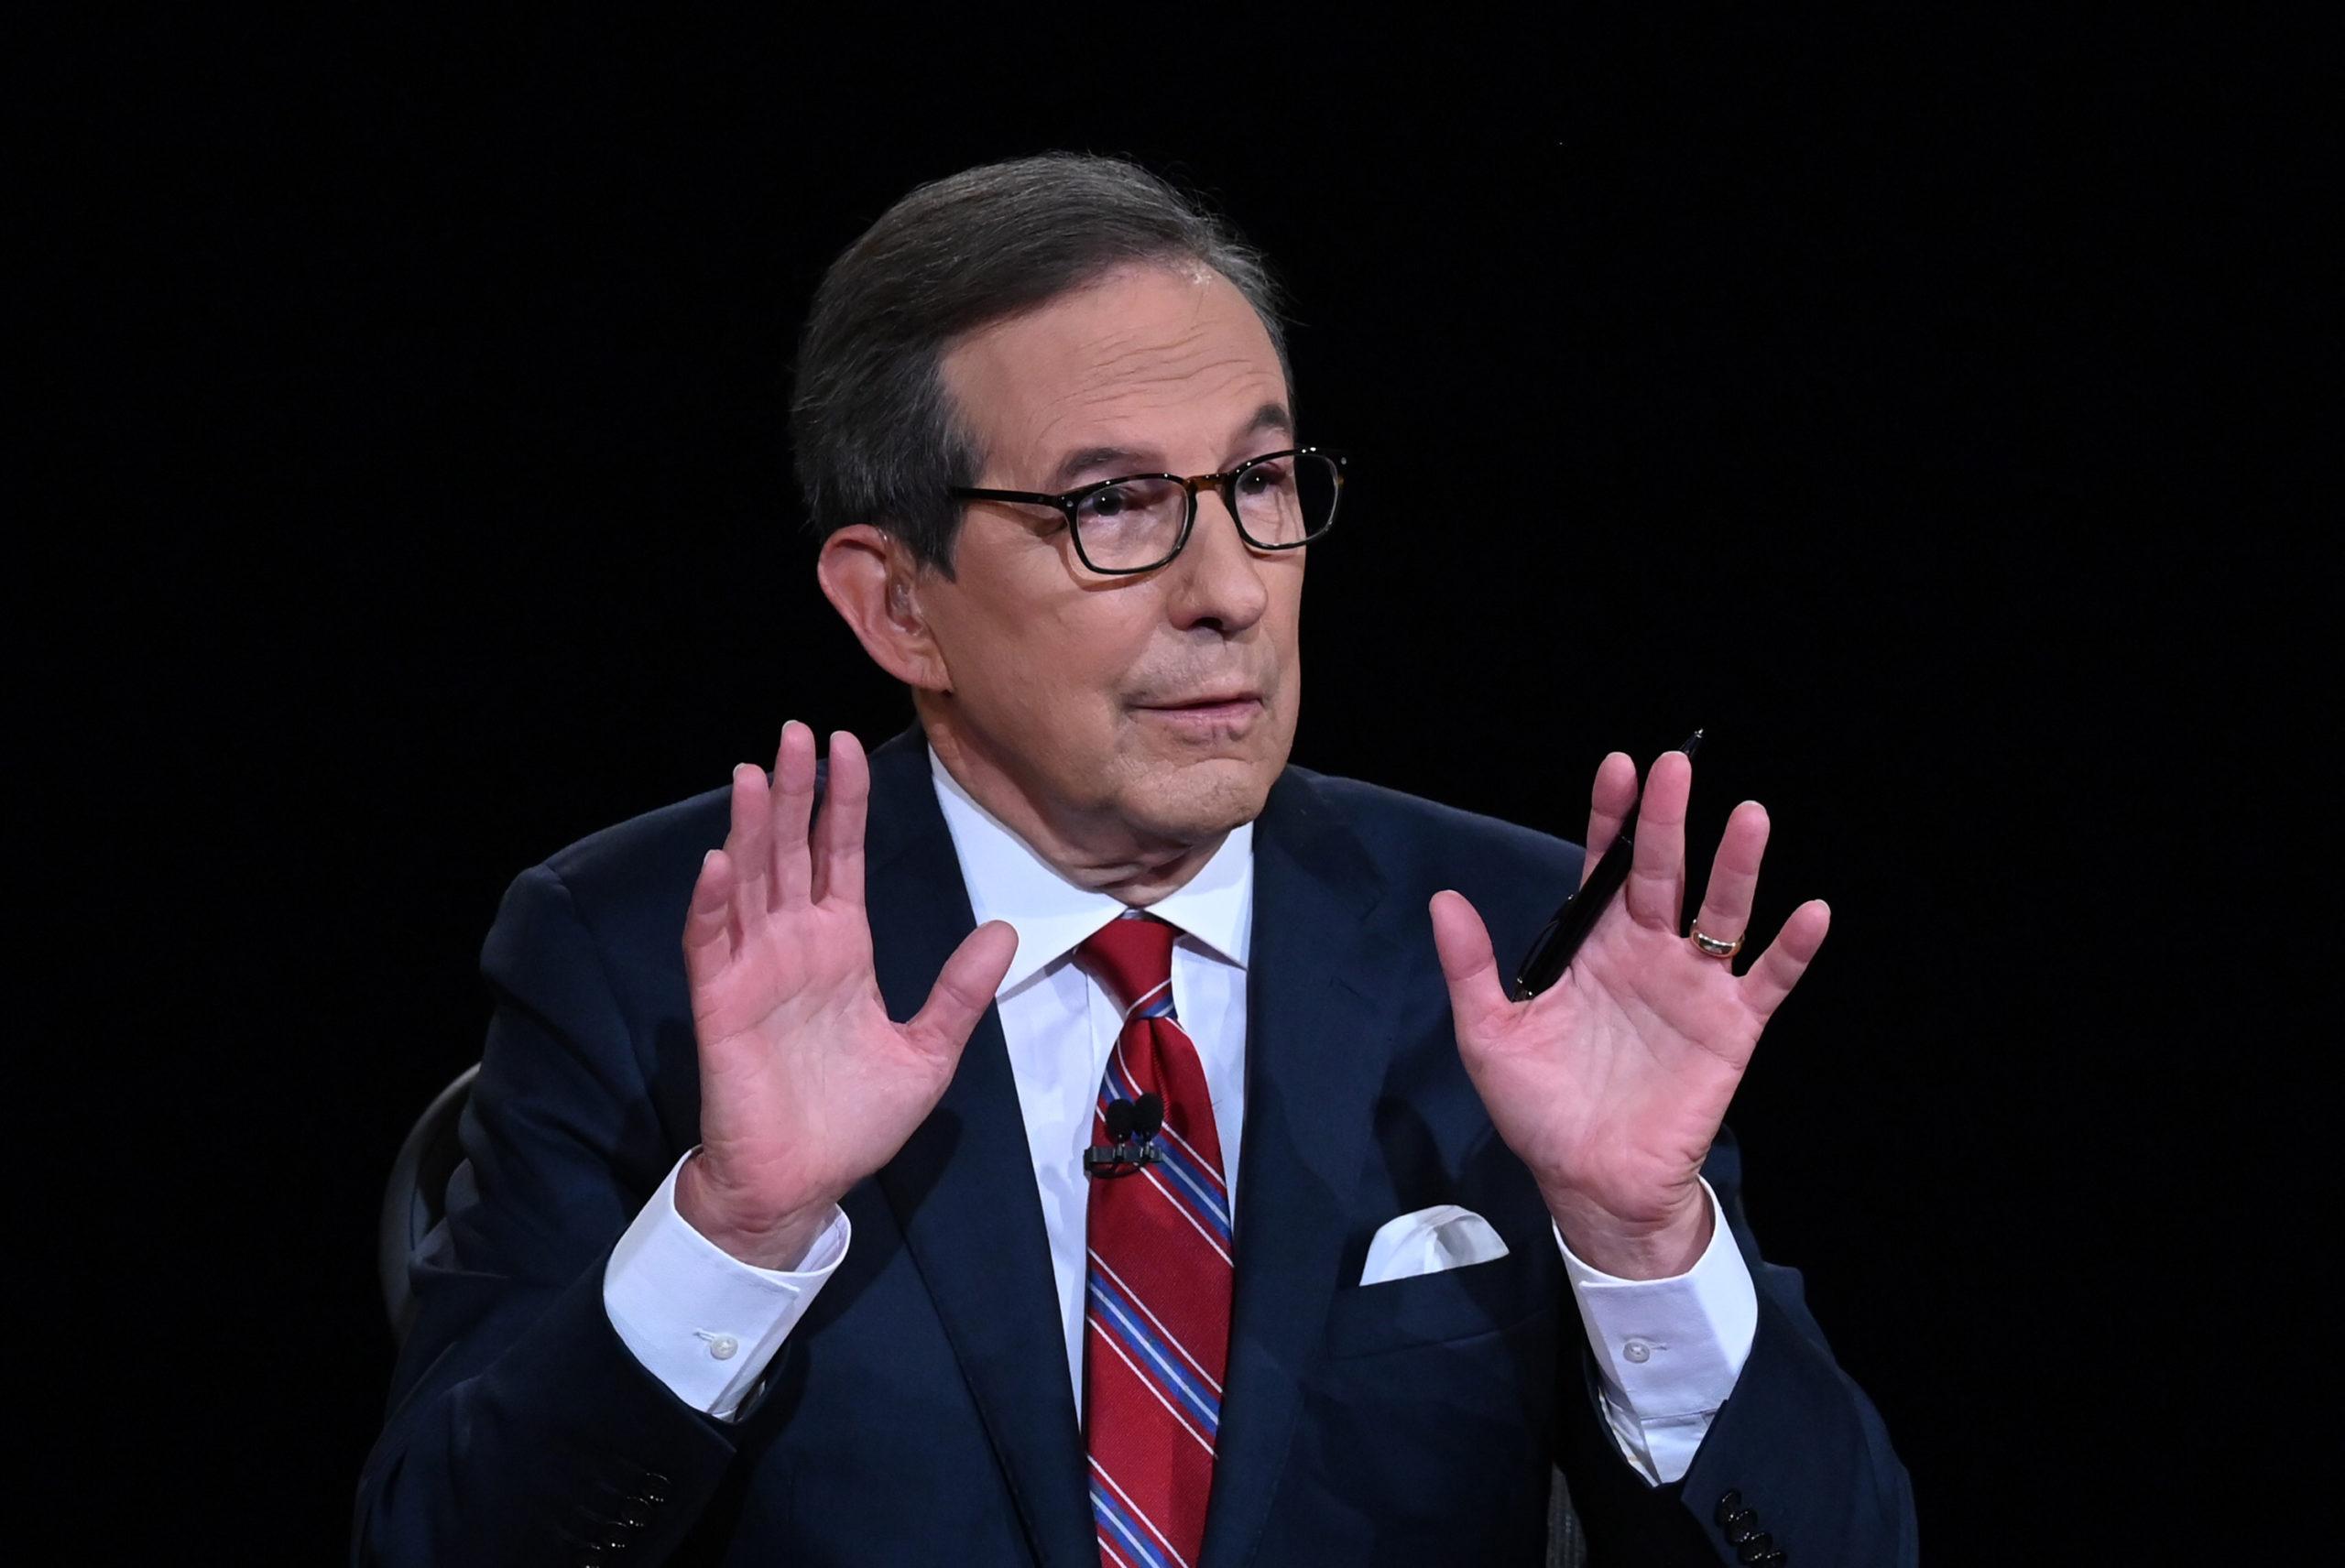 Debate moderator and Fox News anchor Chris Wallace directs the first presidential debate between President Donald Trump and Democratic presidential nominee Joe Biden at the Health Education Campus of Case Western Reserve University in Cleveland on September 29, 2020. (Olivier Douliery/Pool/Getty Images/TNS)